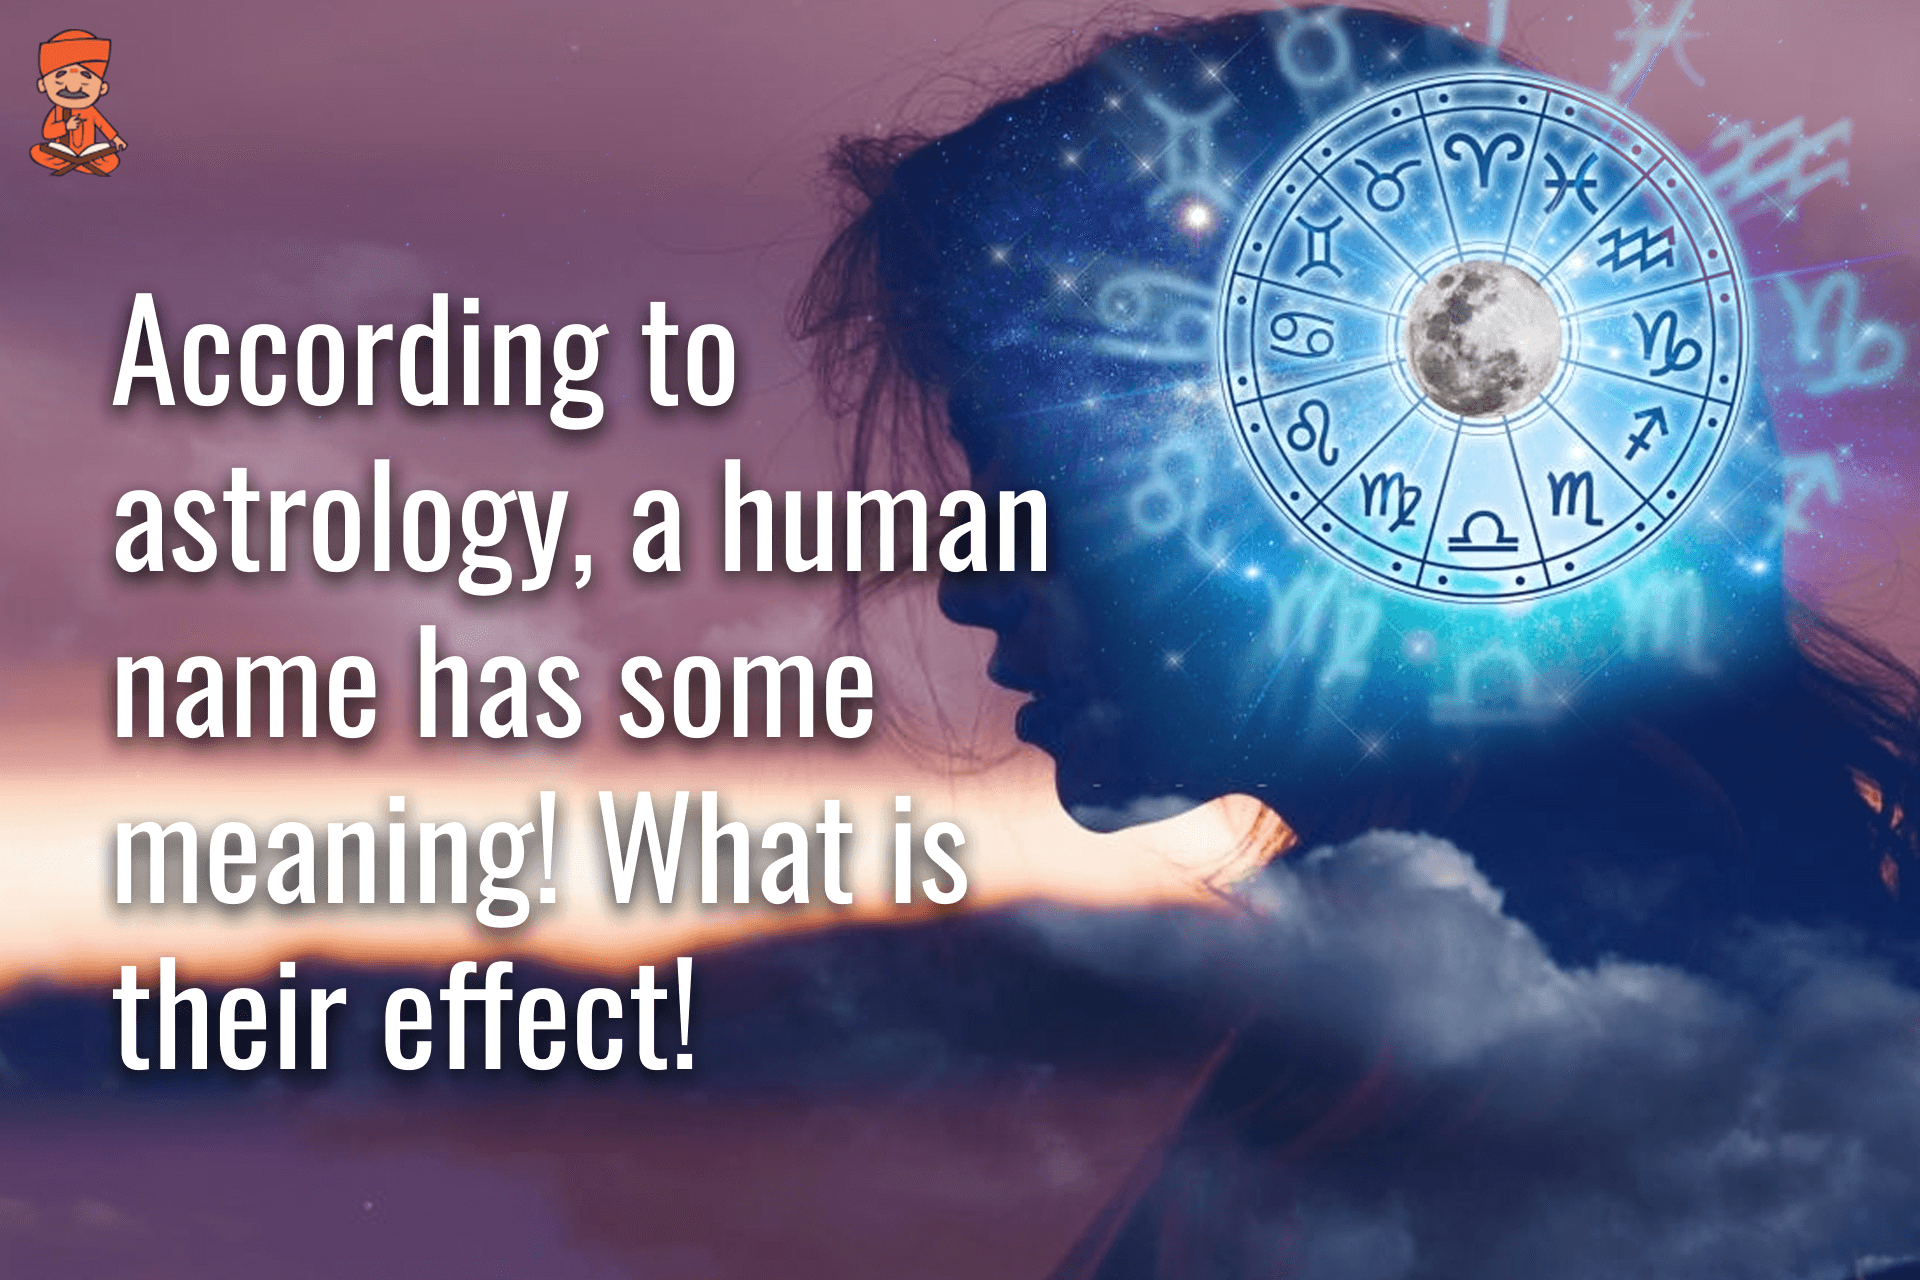 According To Astrology, A Human Name Has Some Meaning! What Is Their Effect!